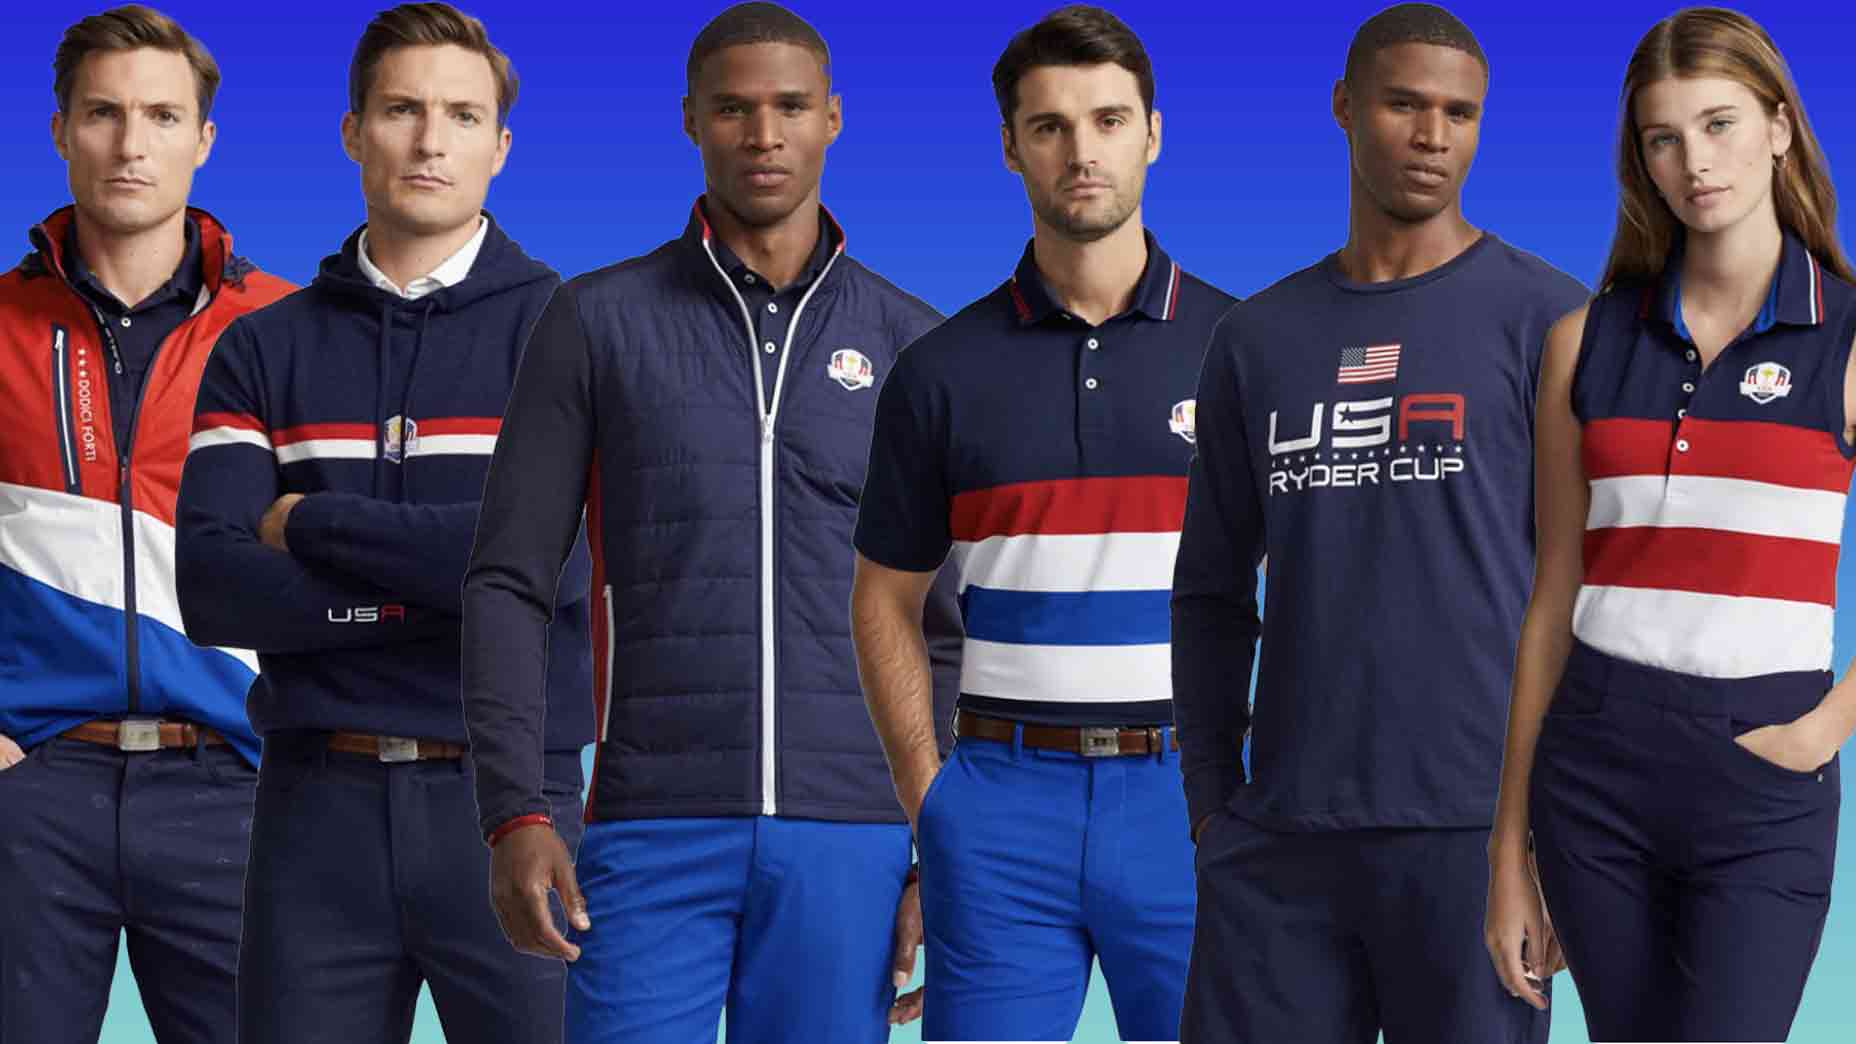 Ralph Lauren's Ryder Cup collection just dropped. Shop our 10 favorite pieces BVM Sports